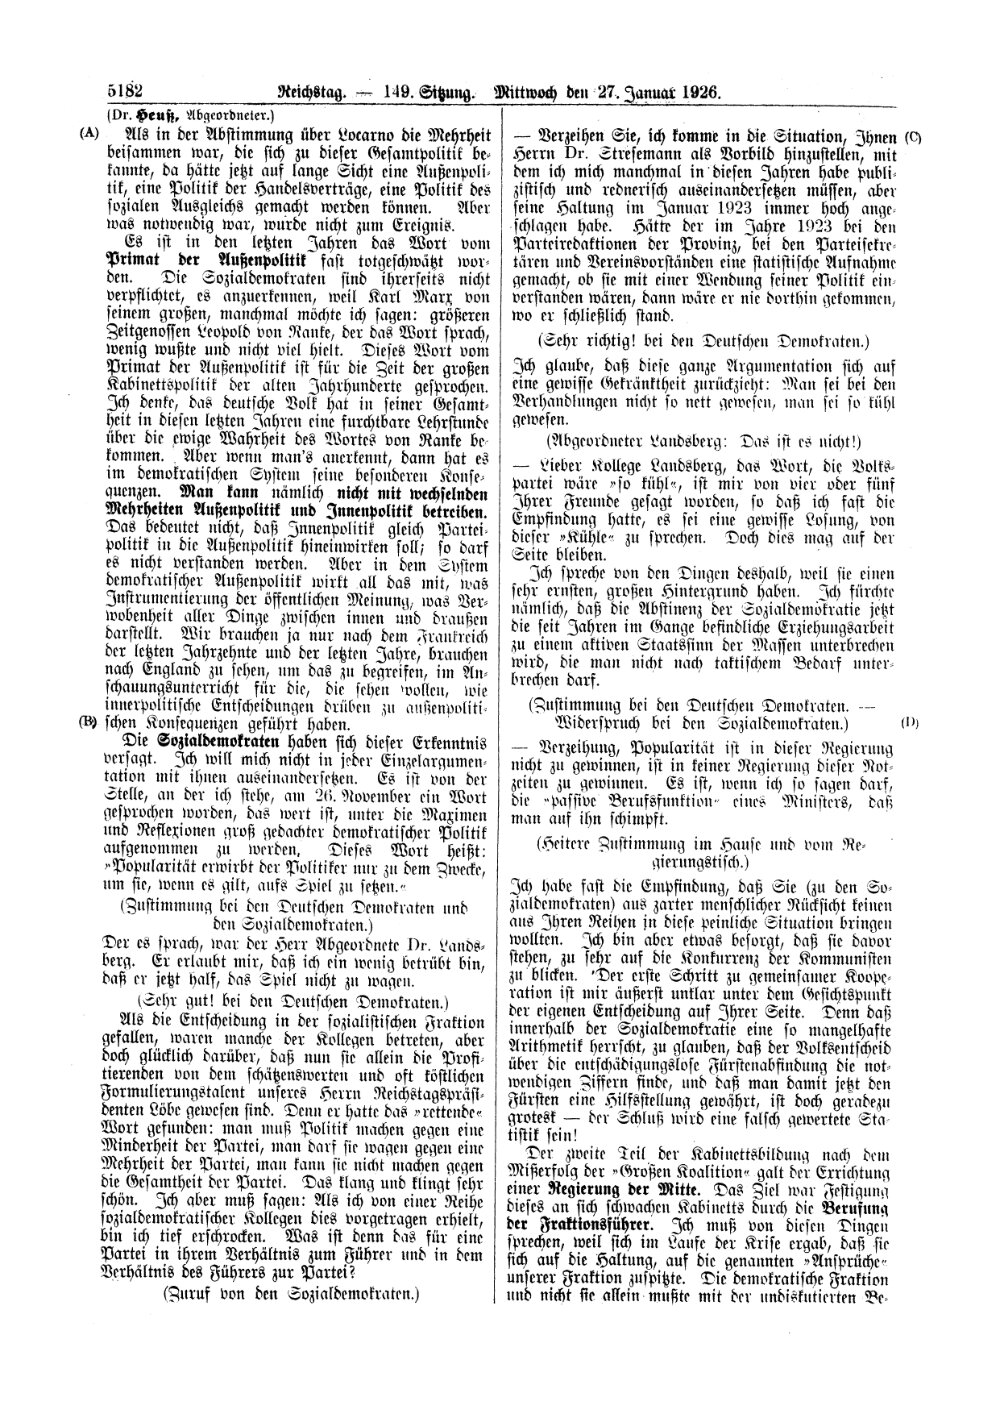 Scan of page 5182